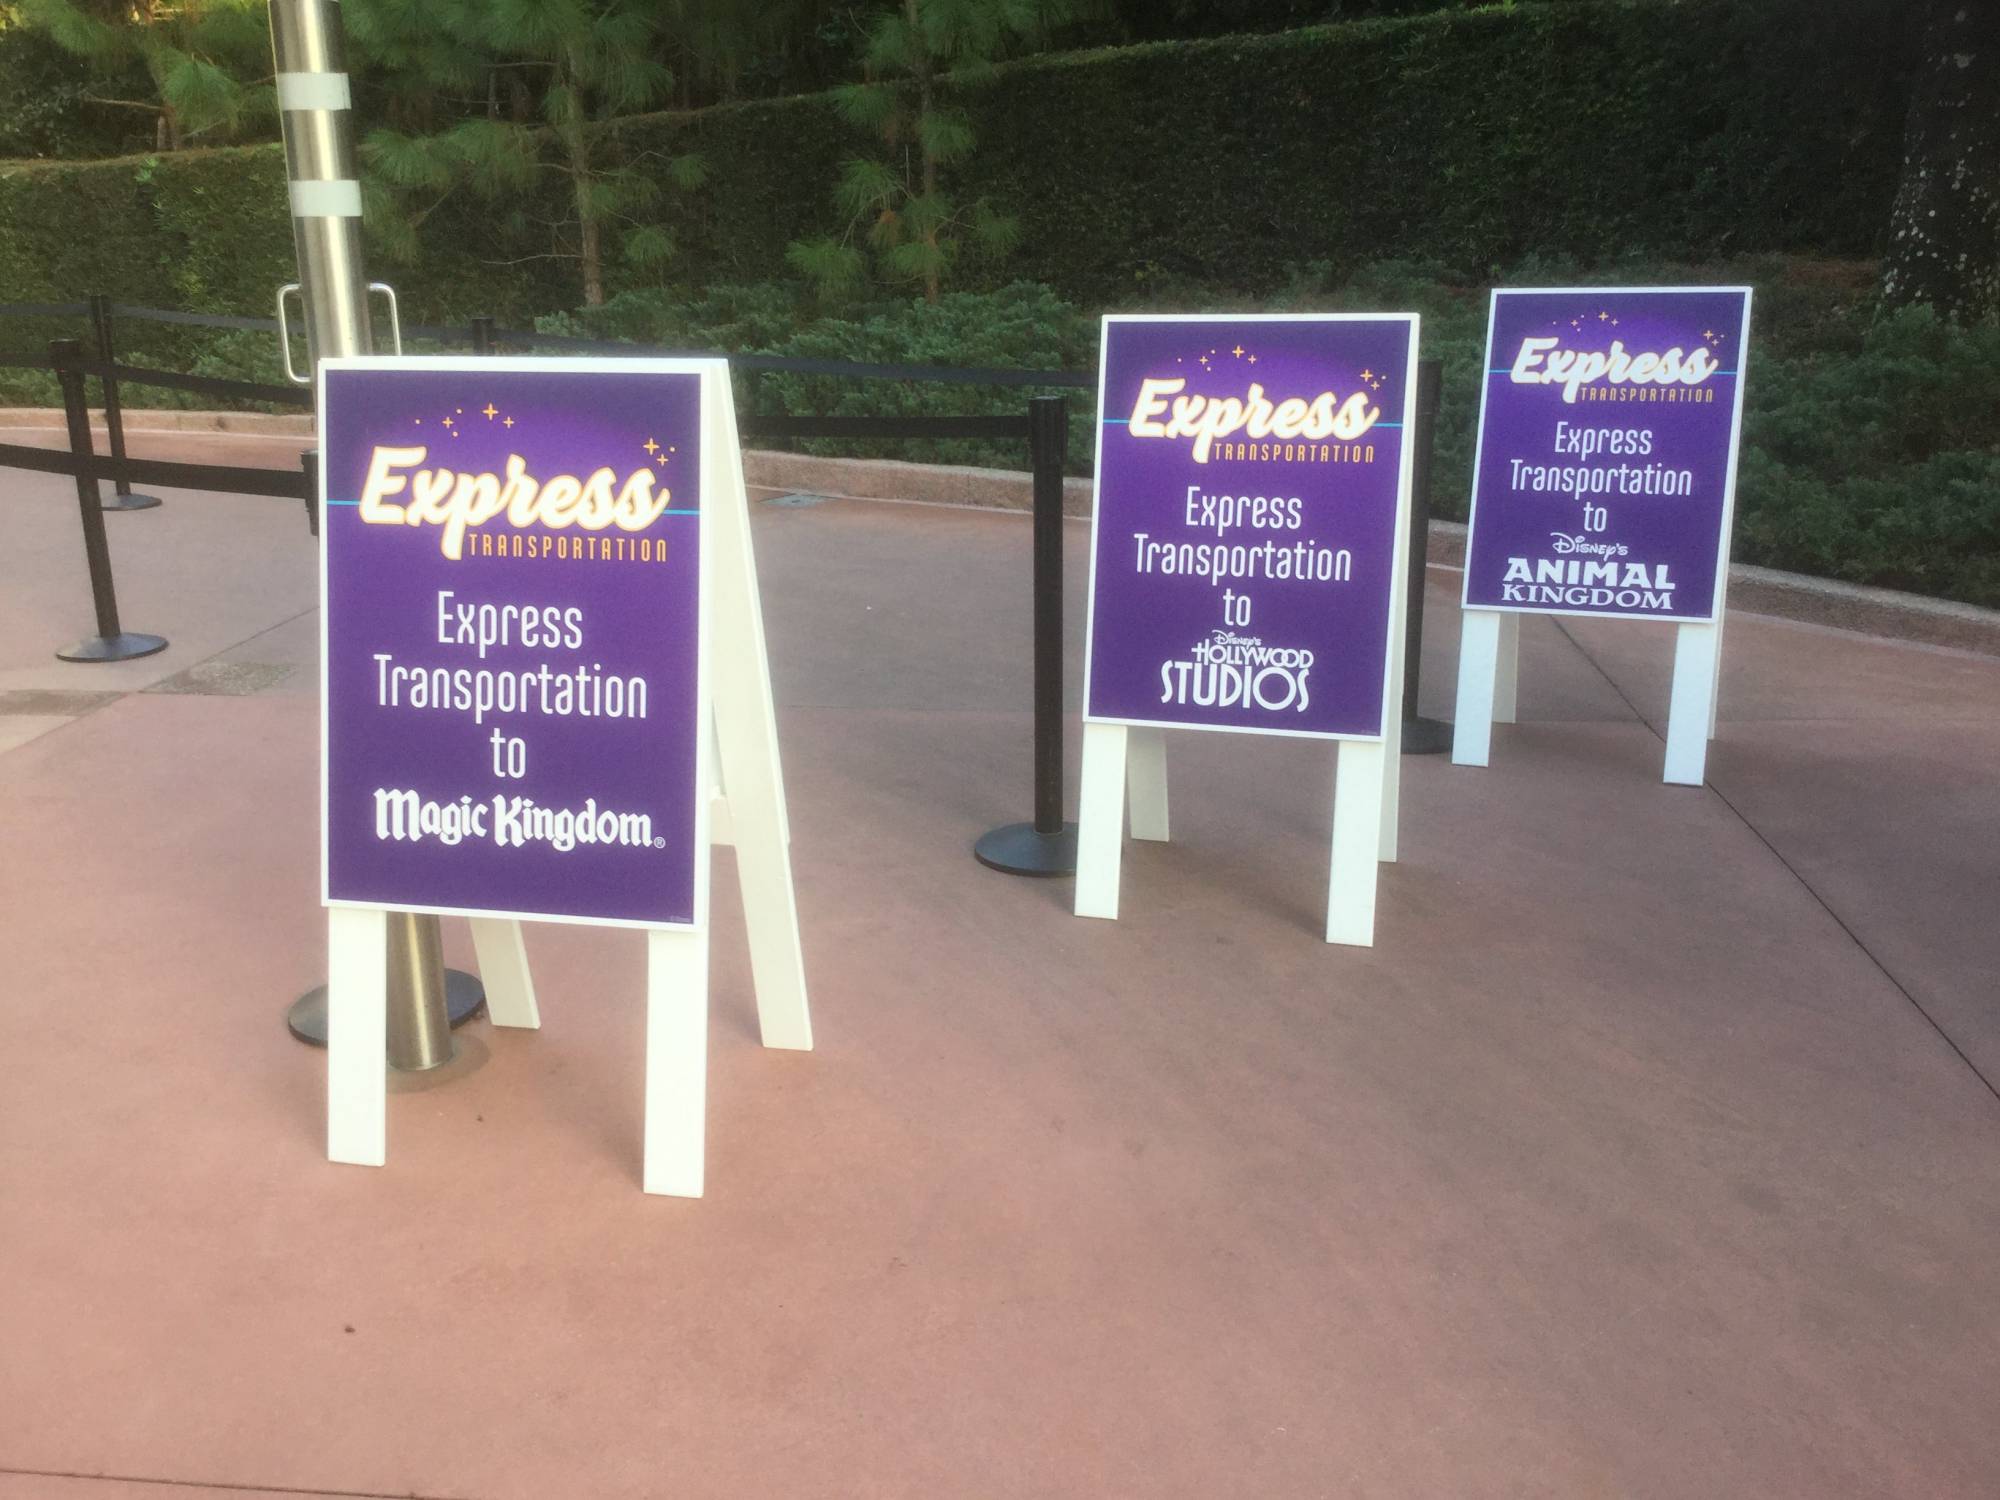 Make the most of the Express Transportation with your Park Hopper Pass | PassPorter.com